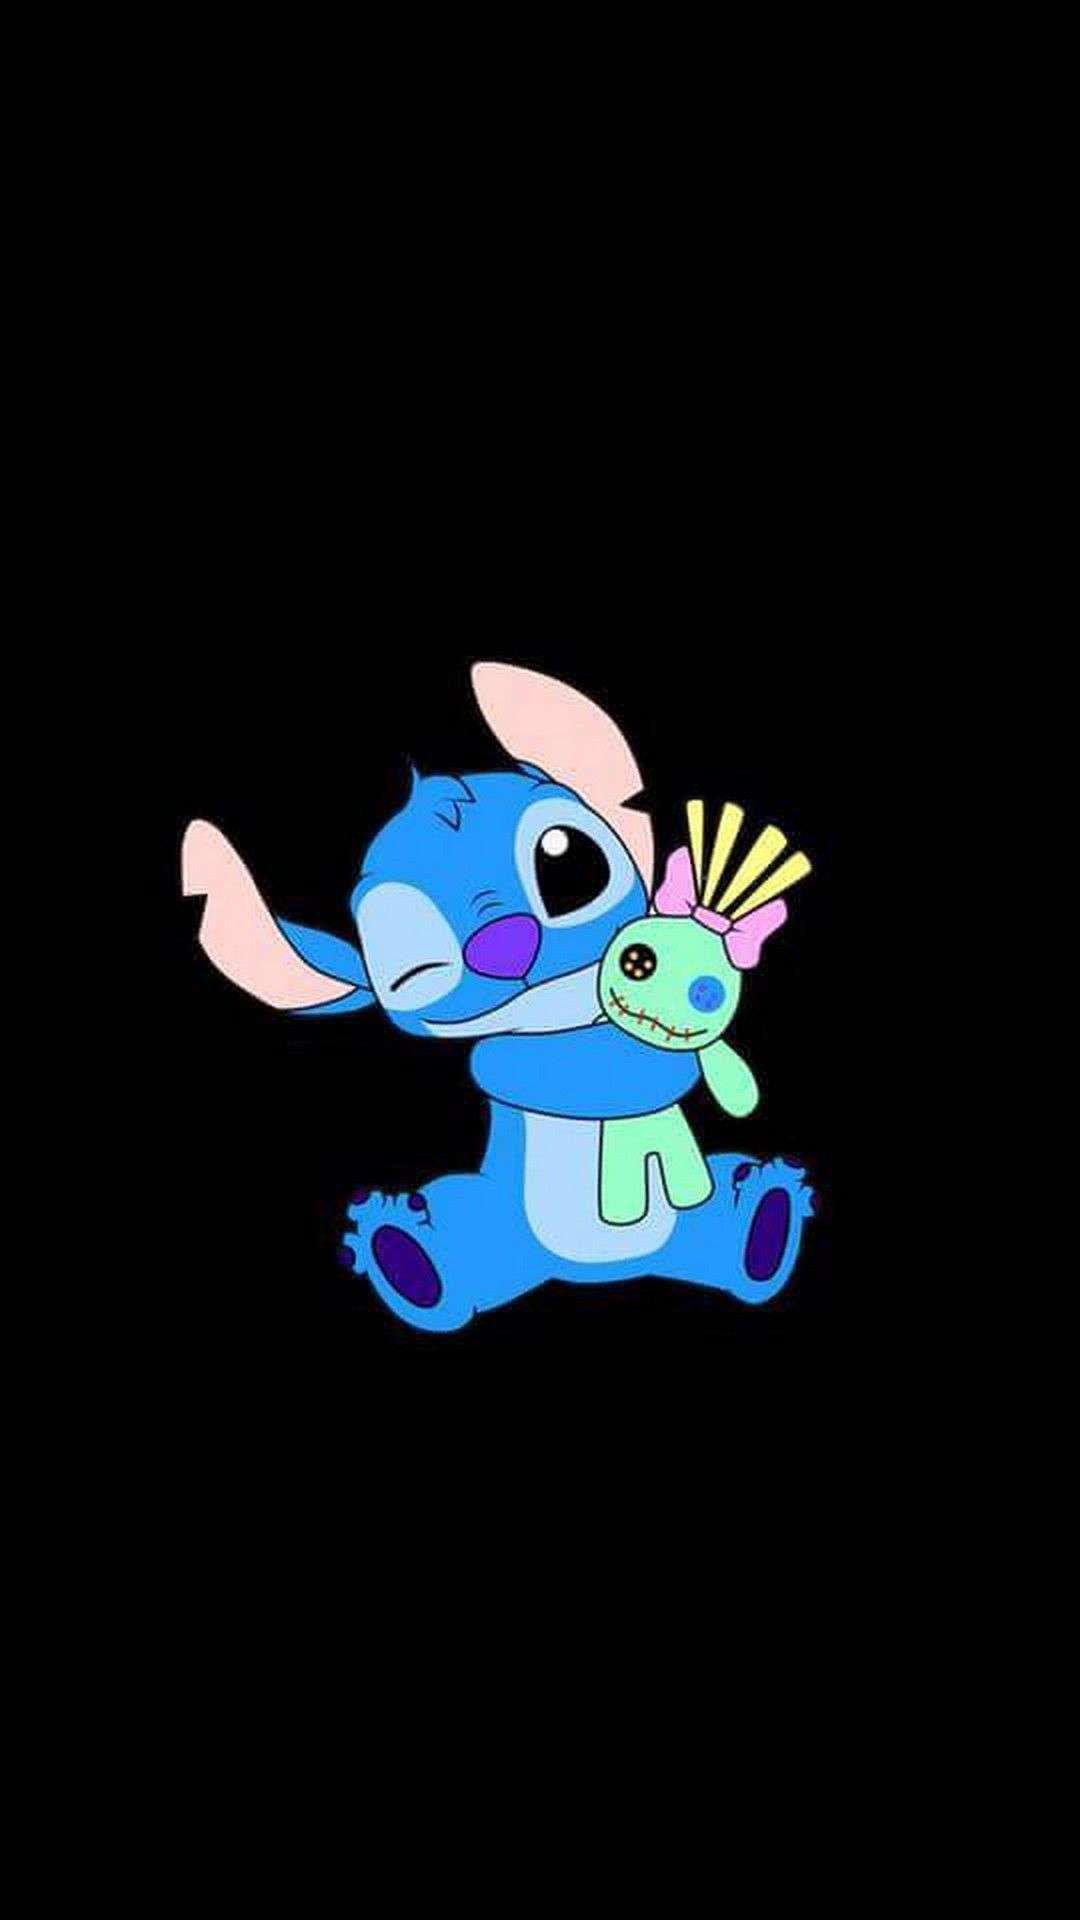 Stitch Hd Wallpapers For Mobile - Stitch Wallpaper Iphone Black , HD Wallpaper & Backgrounds